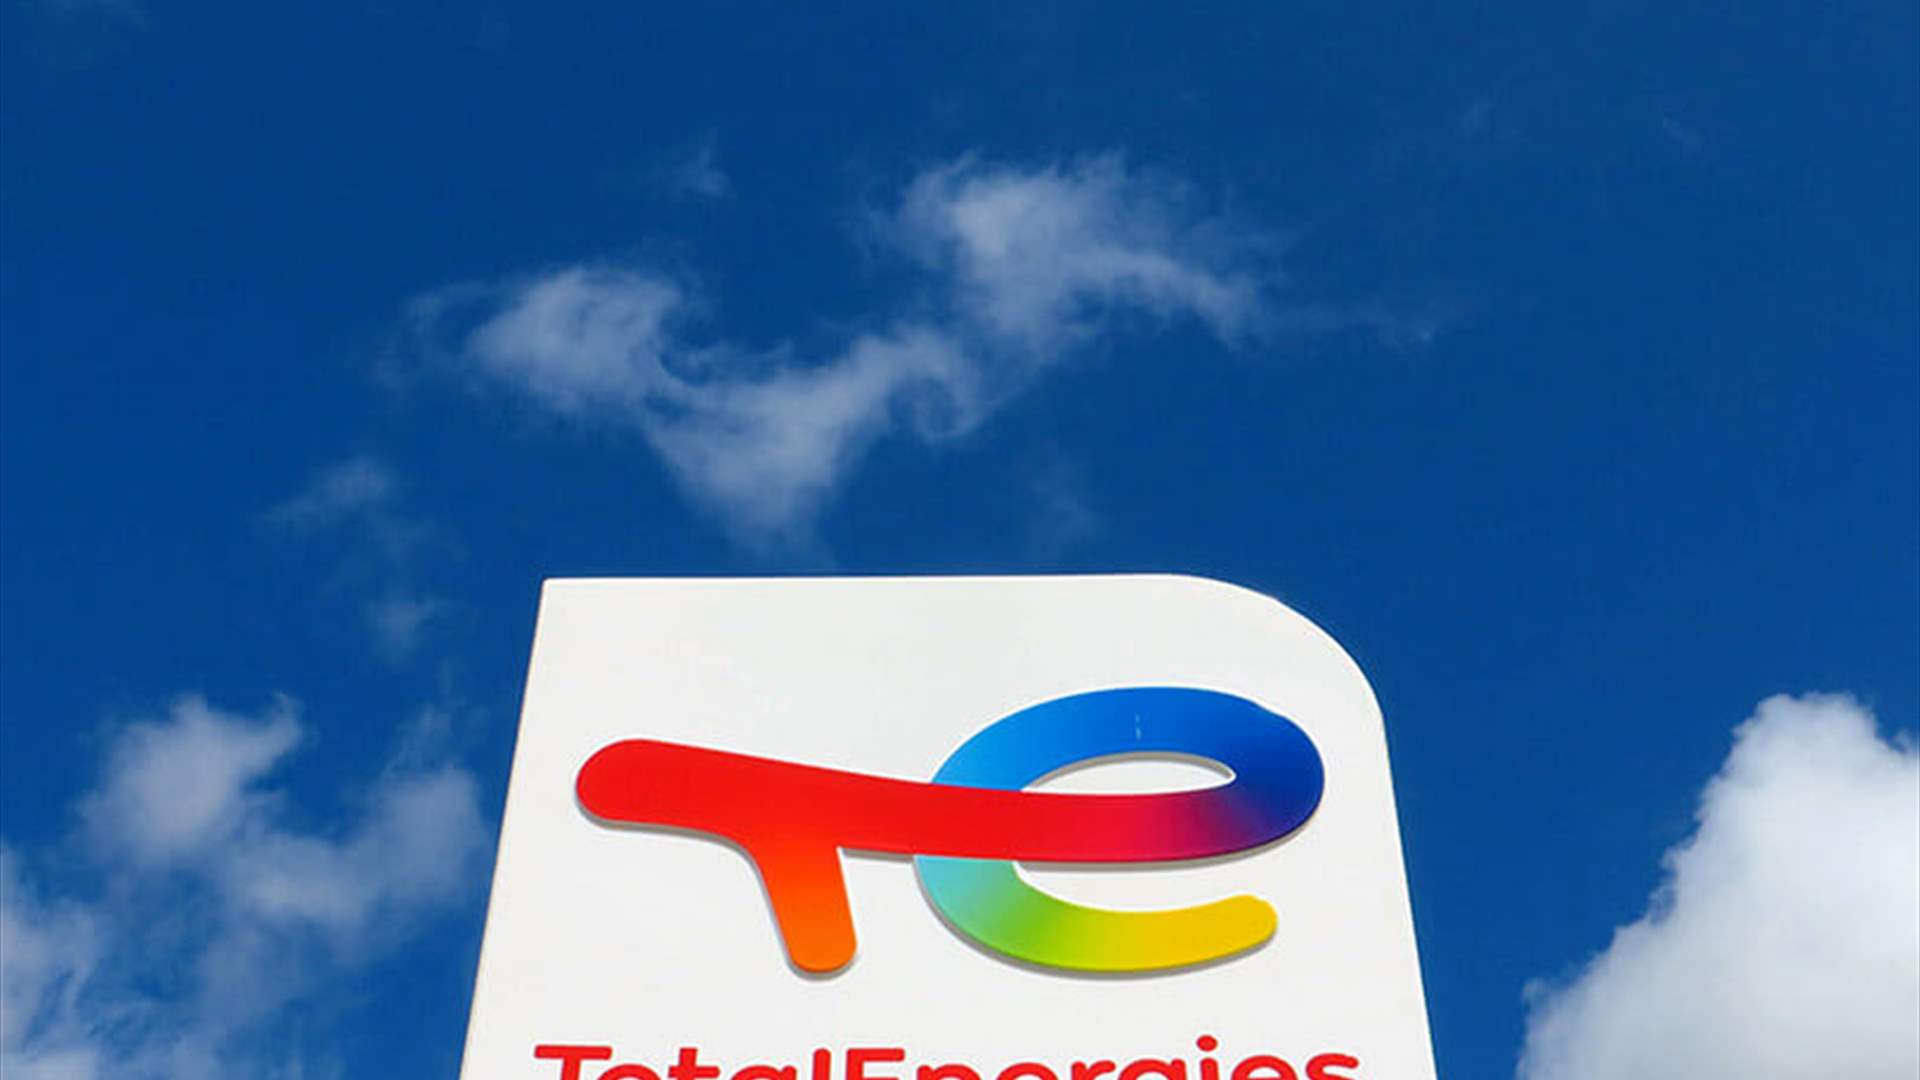 Total Energies contracts Transocean to drill first well in Lebanon&#39;s block 9